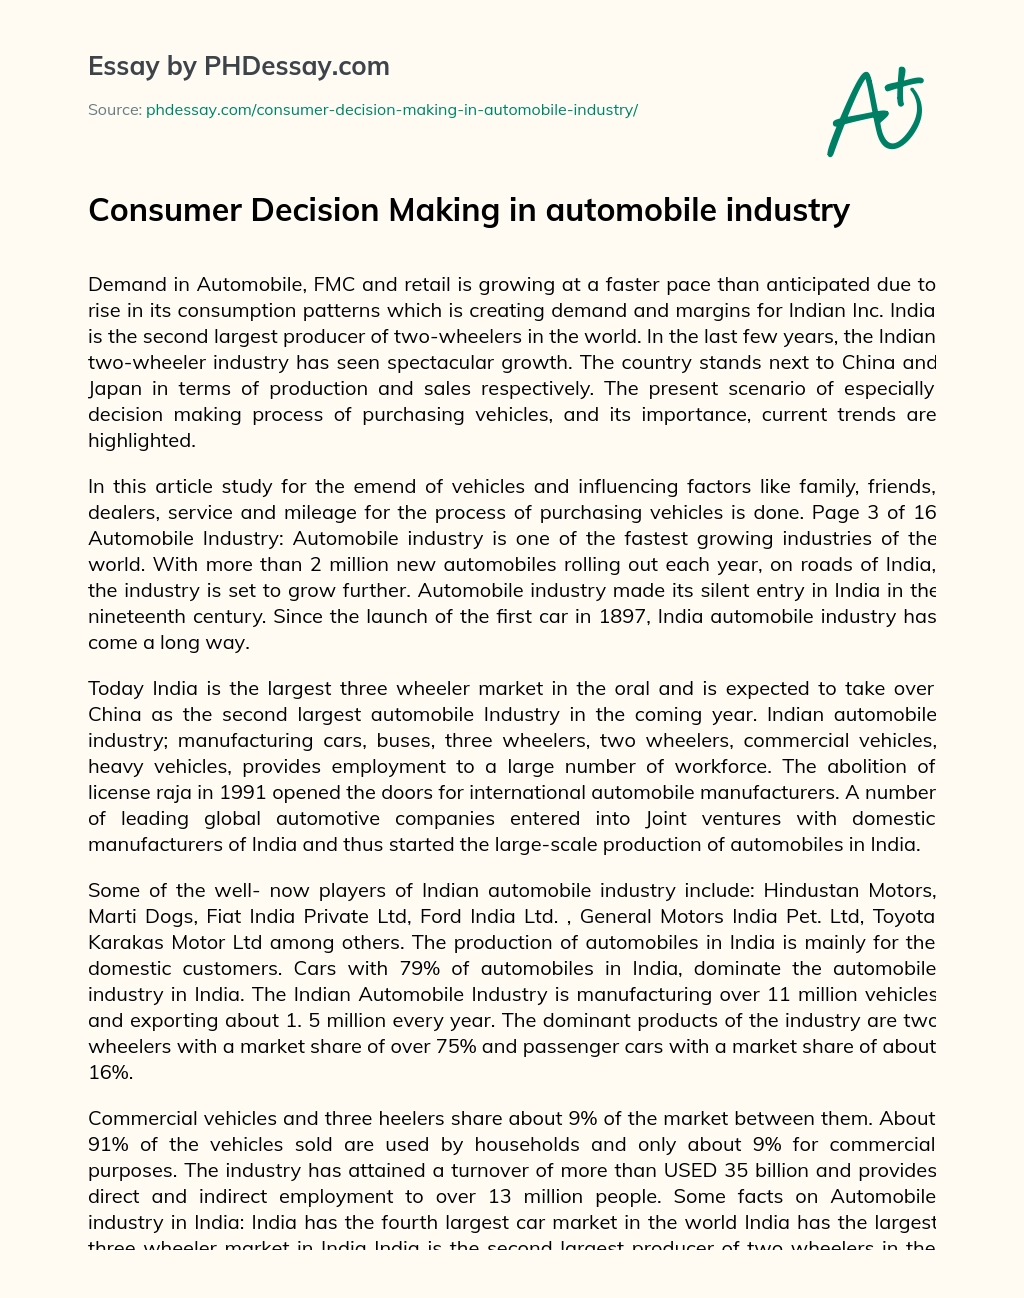 Consumer Decision Making in Automobile Industry essay